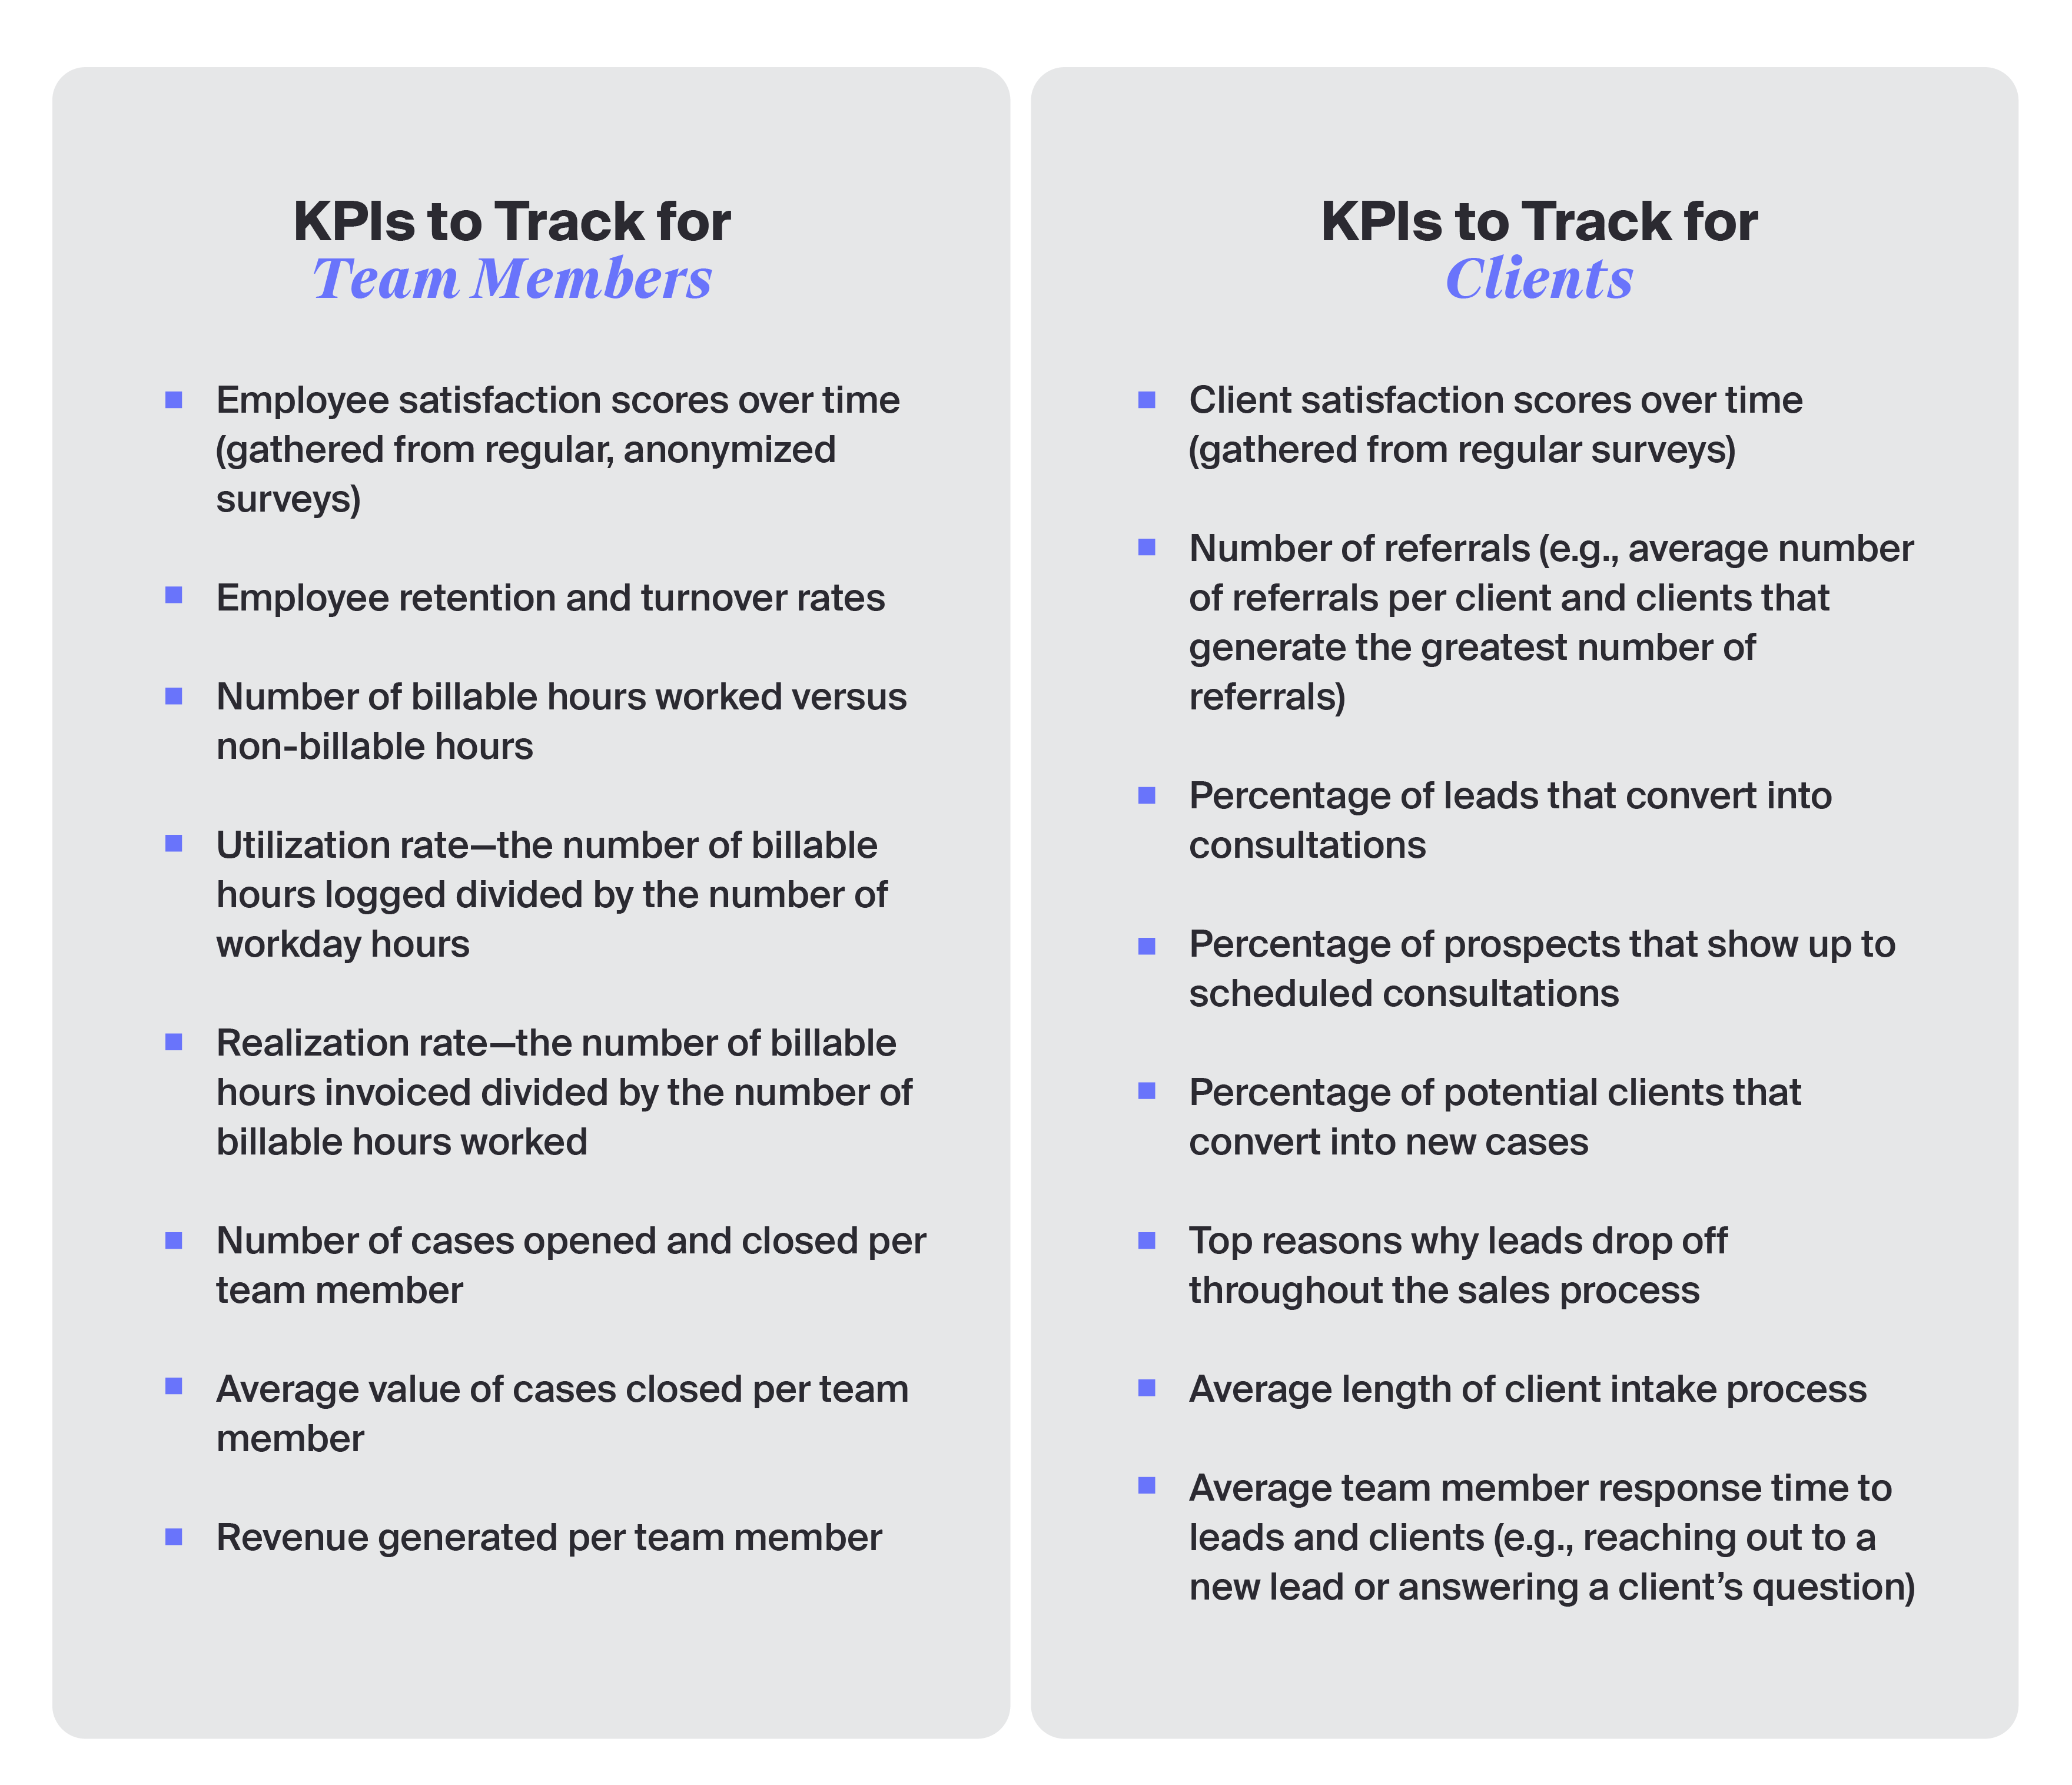 Evaluating KPIs for clients and team members can help you build a more successful firm. Learn how tech can make tracking KPIs easy at MyCase.